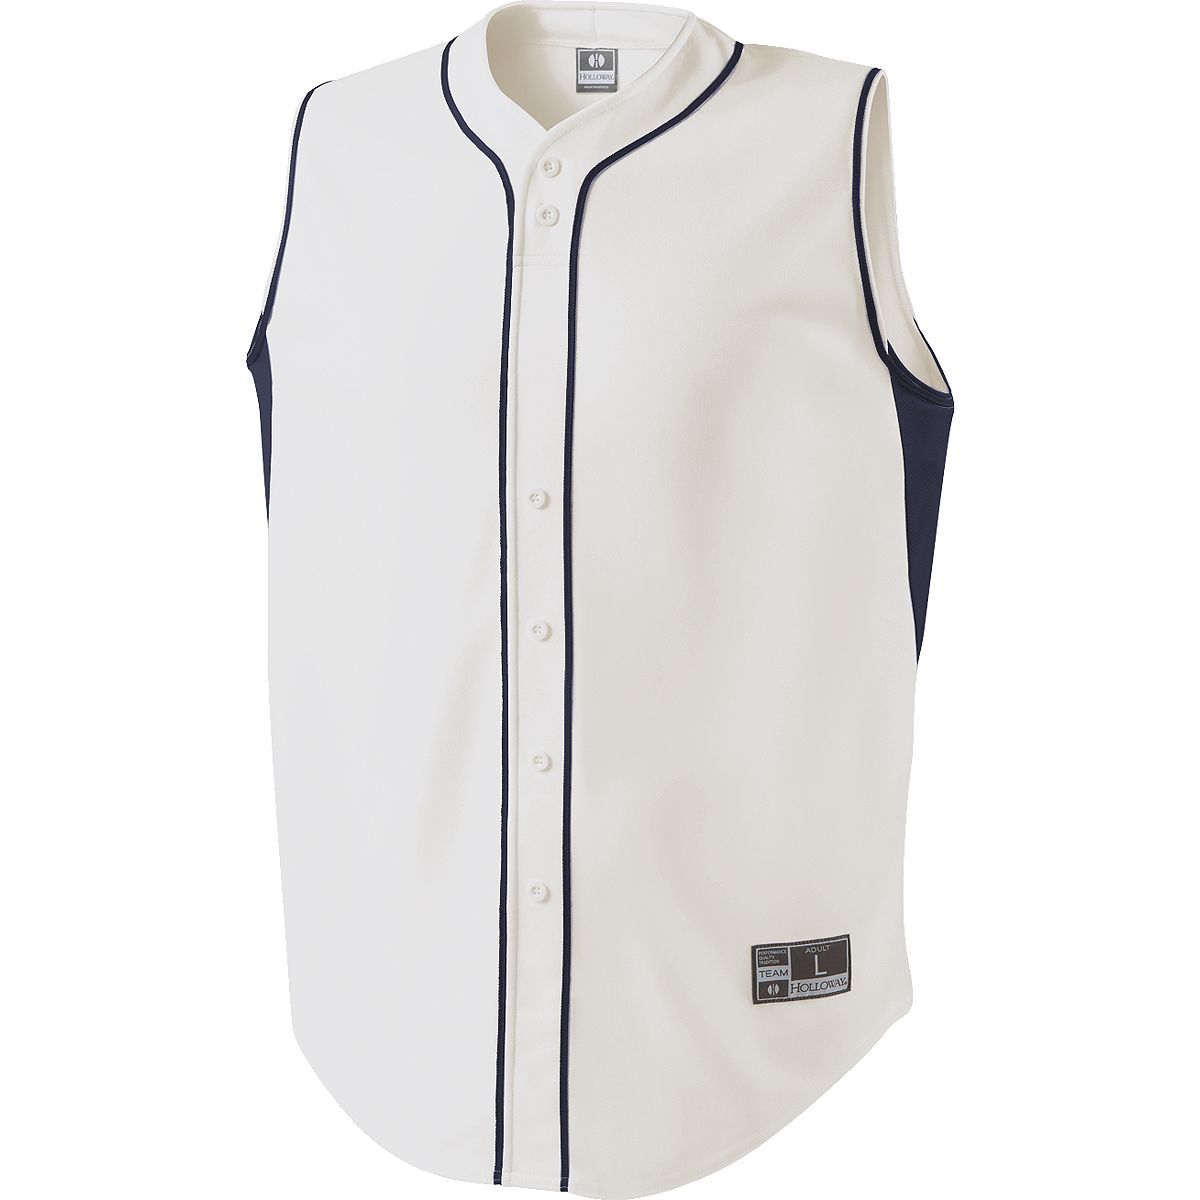 Holloway Fierce Jersey in White/Navy  -Part of the Adult, Adult-Jersey, Baseball, Holloway, Shirts, All-Sports, All-Sports-1 product lines at KanaleyCreations.com